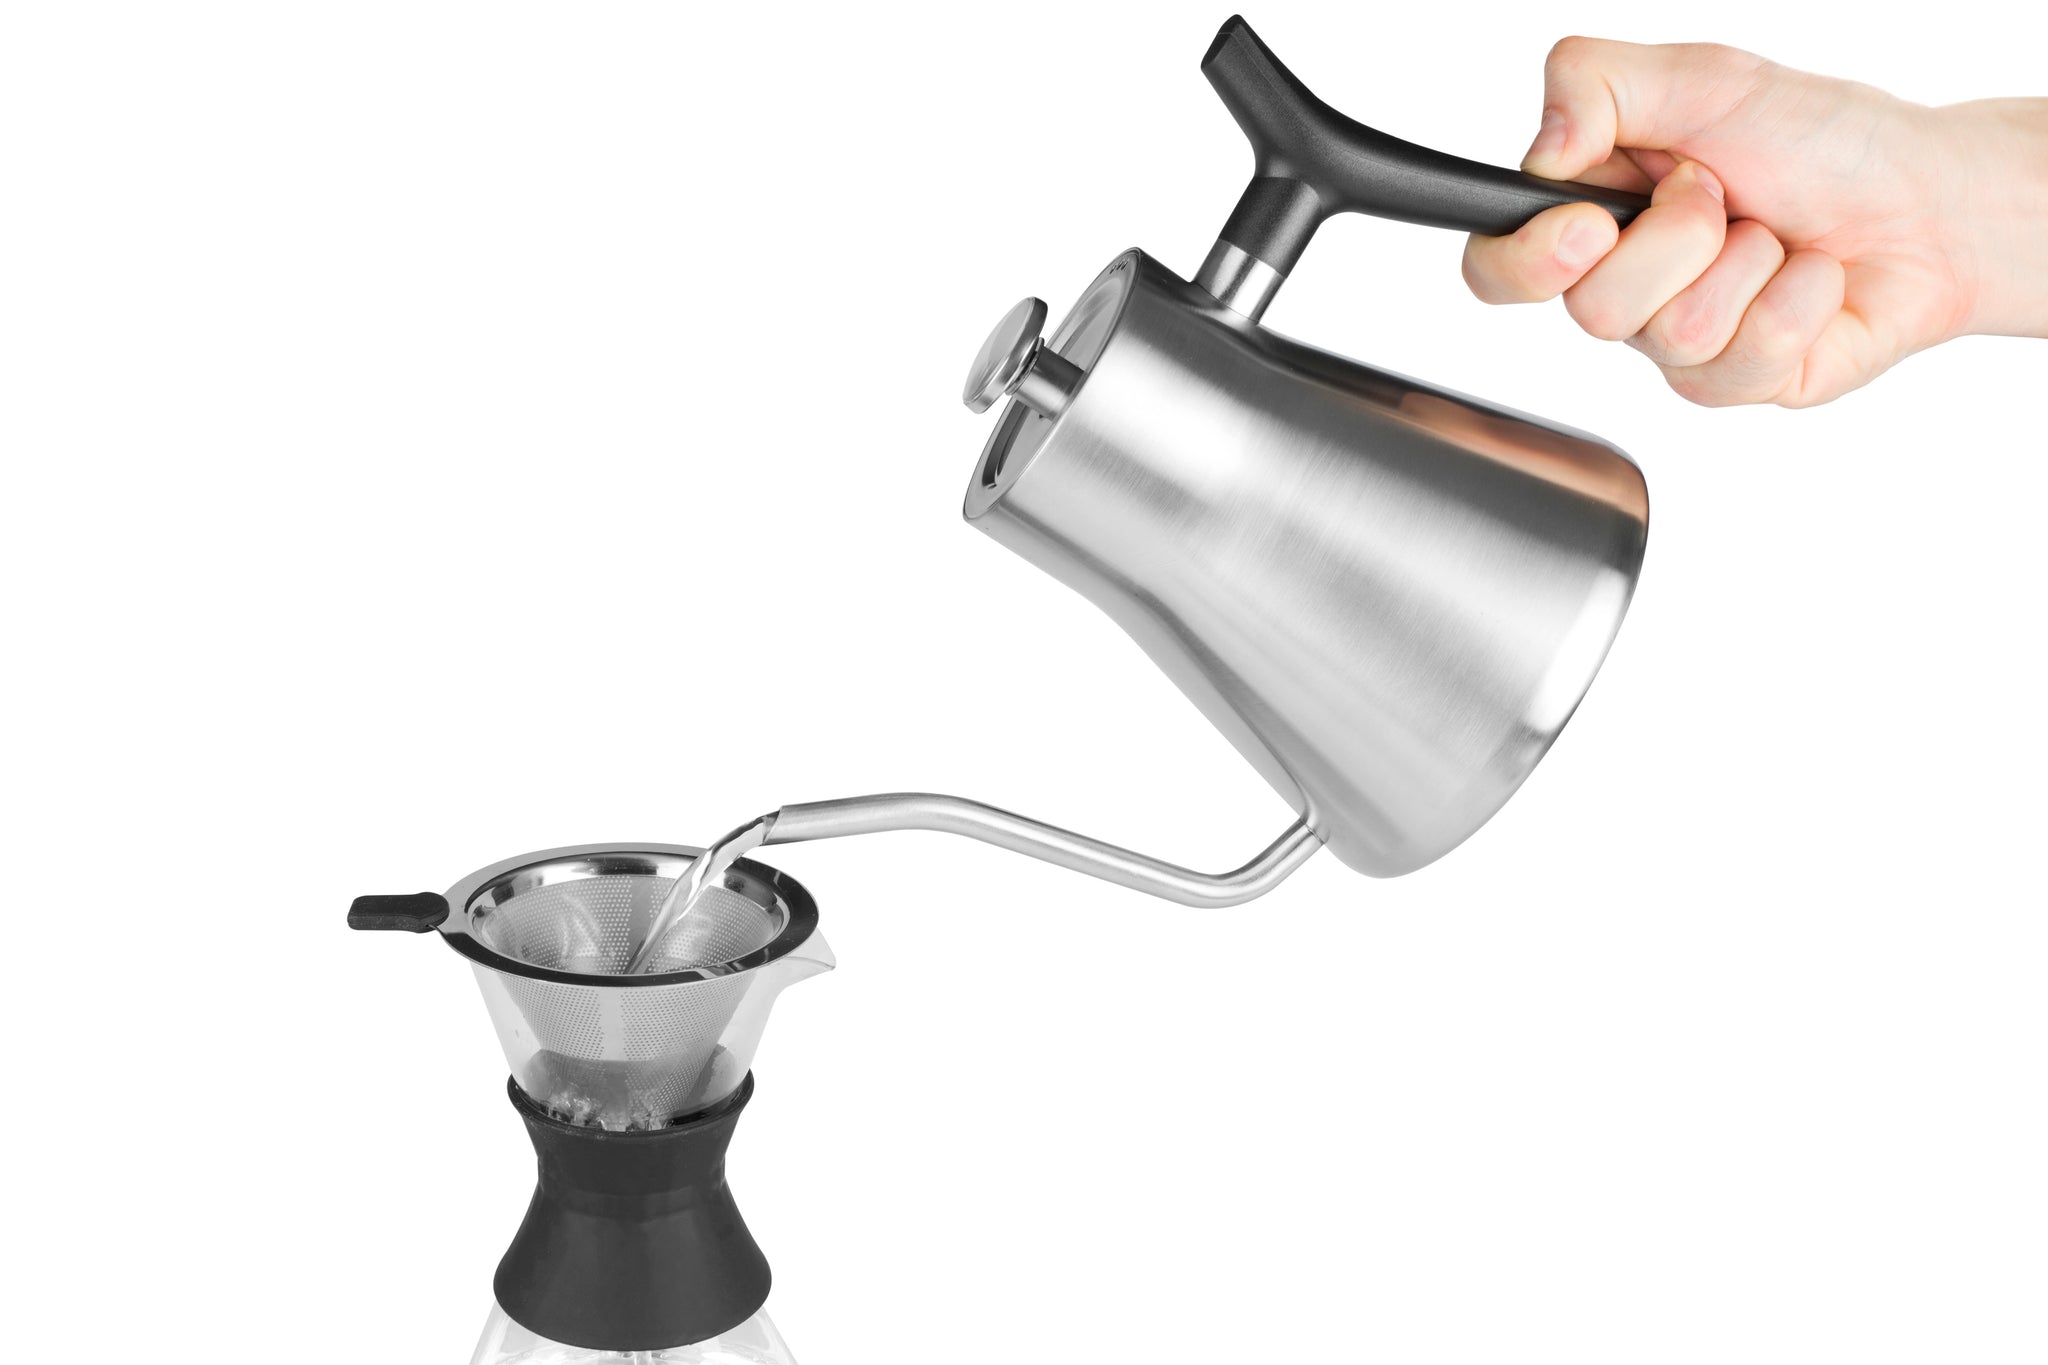 Pour Over Kettle - 1.2L – Coffee Bear